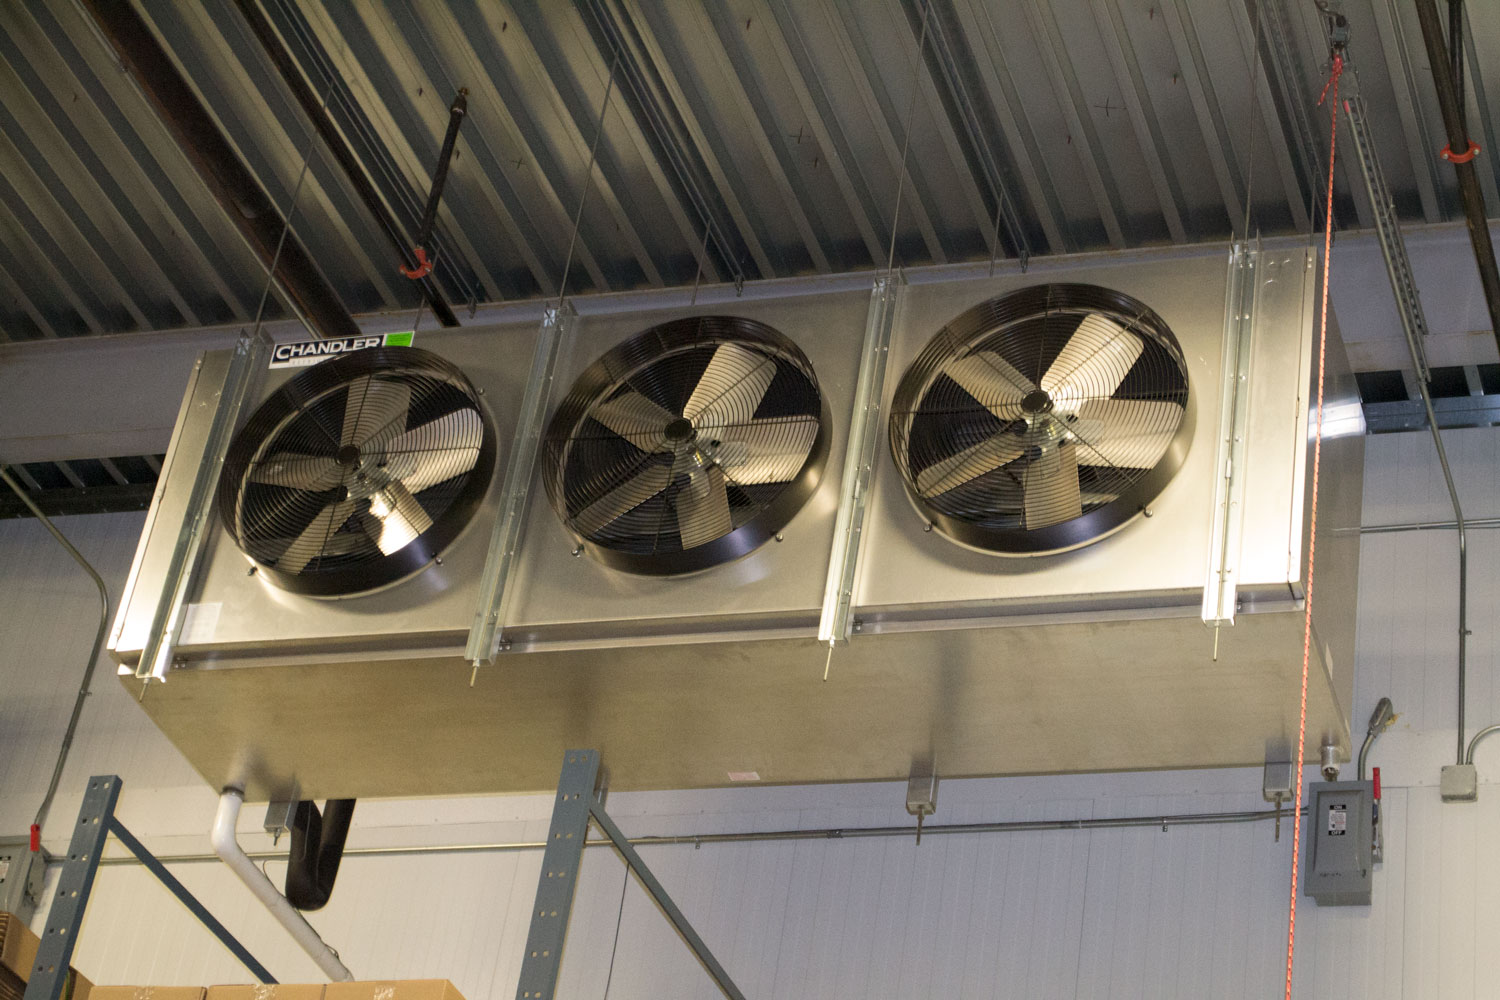 NRM remote refrigeration controls Fans mounted on the wall